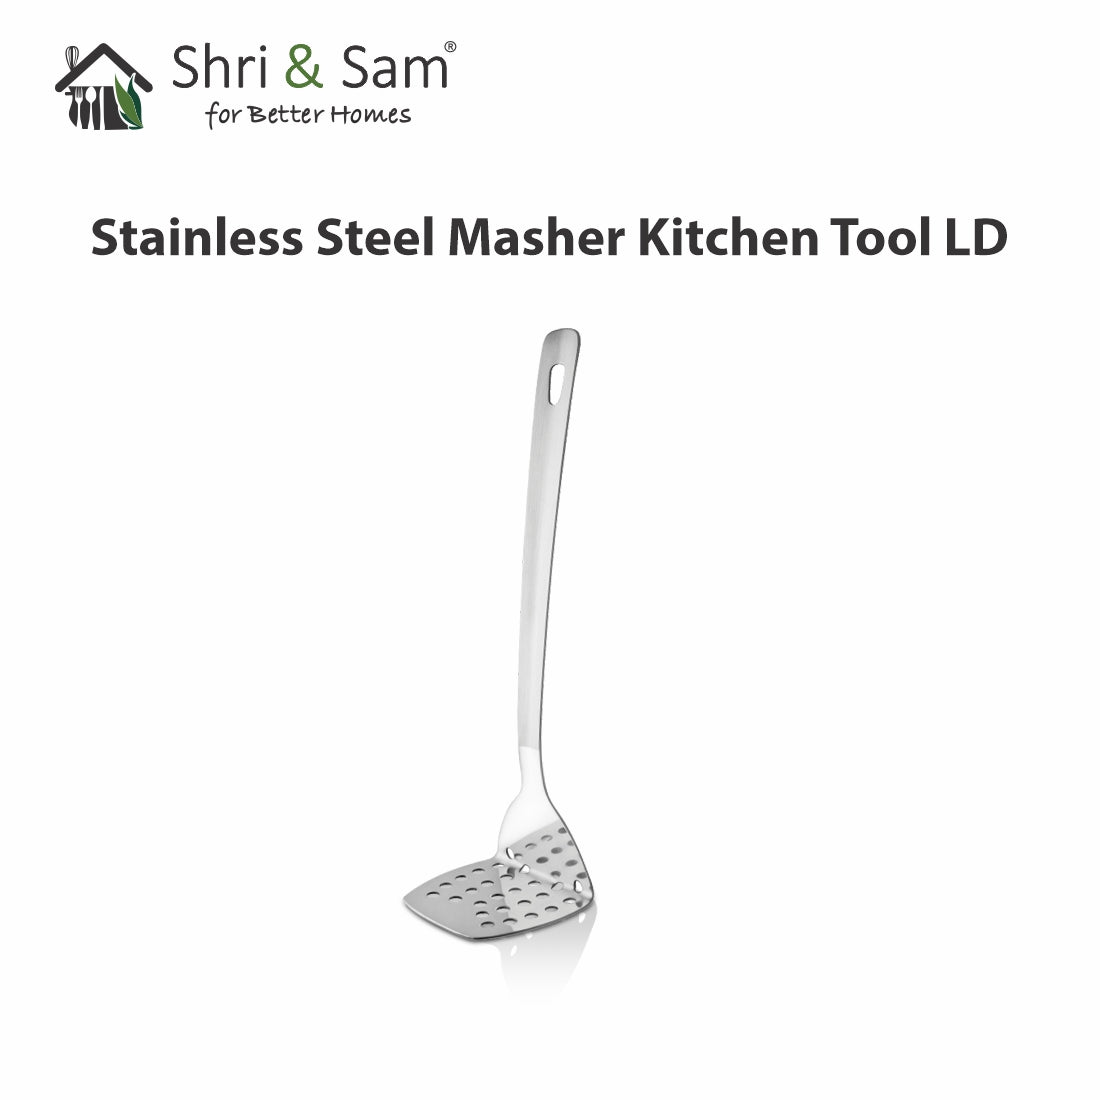 Stainless Steel Masher Kitchen Tool LD